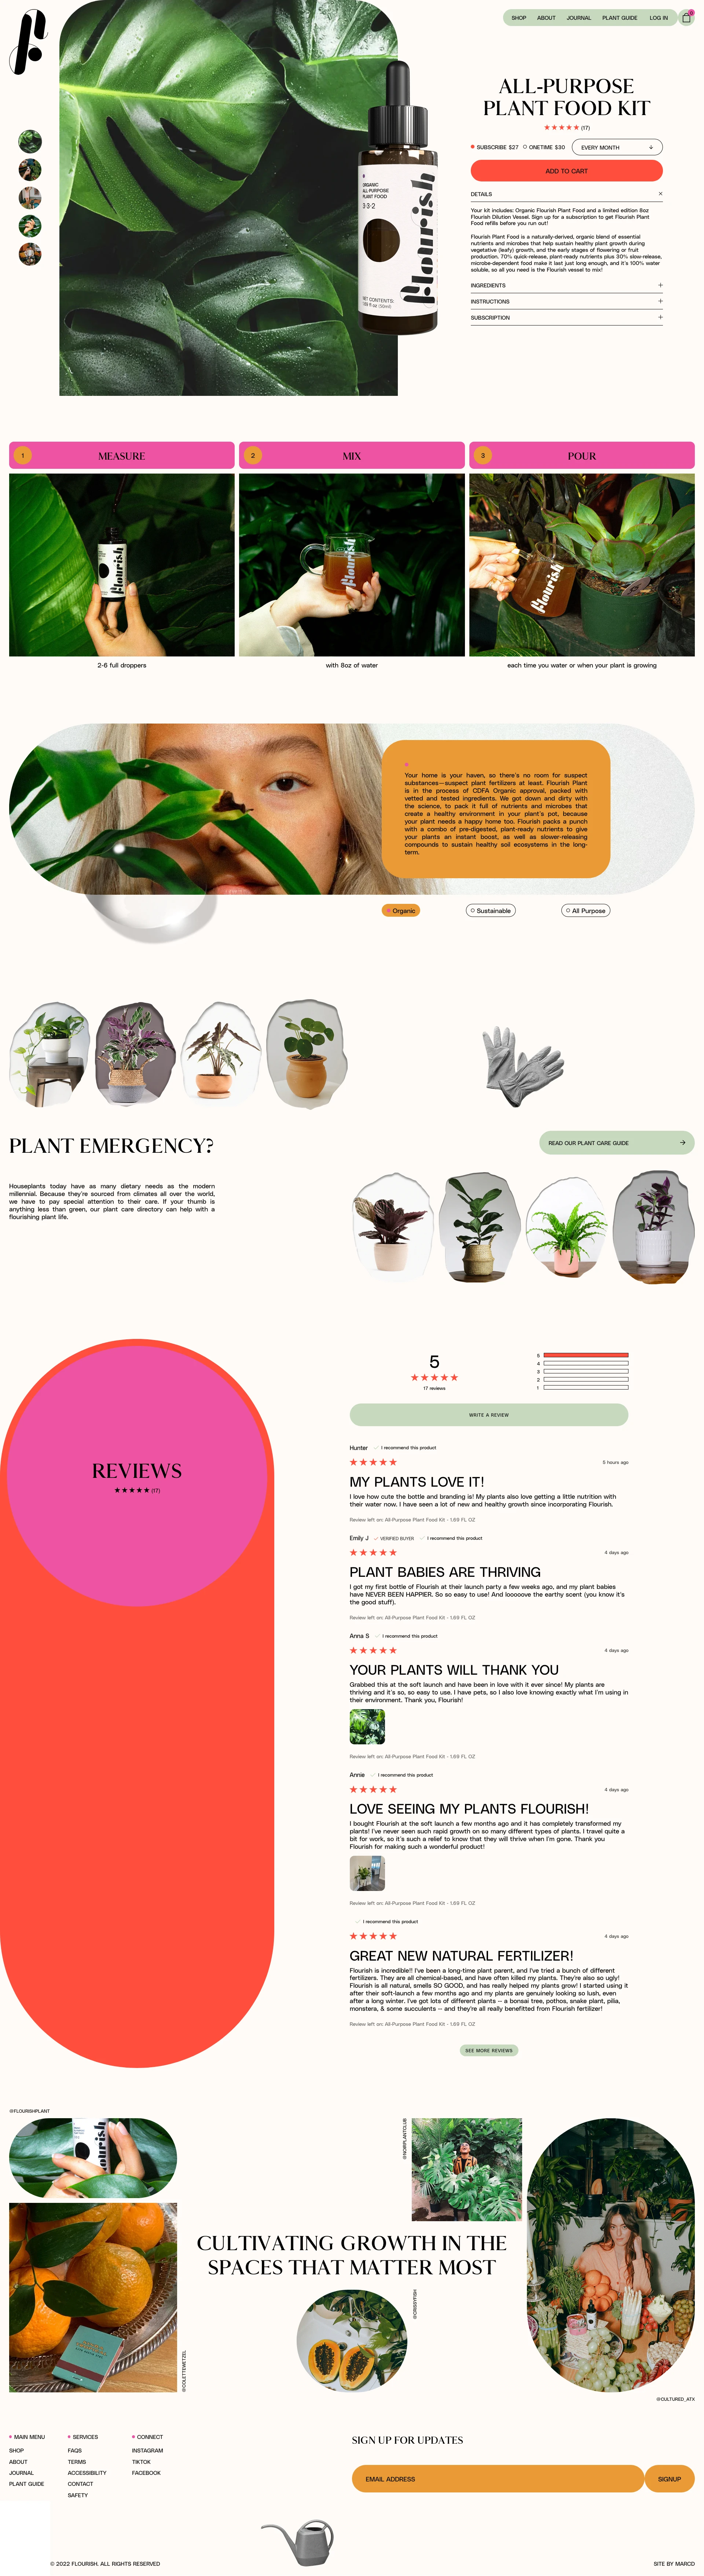 Flourish Landing Page Example: Flourish is rooted in community and committed to being your home base for all things plant care. Use us as a resource and together, let's inspire a world where we can all flourish.